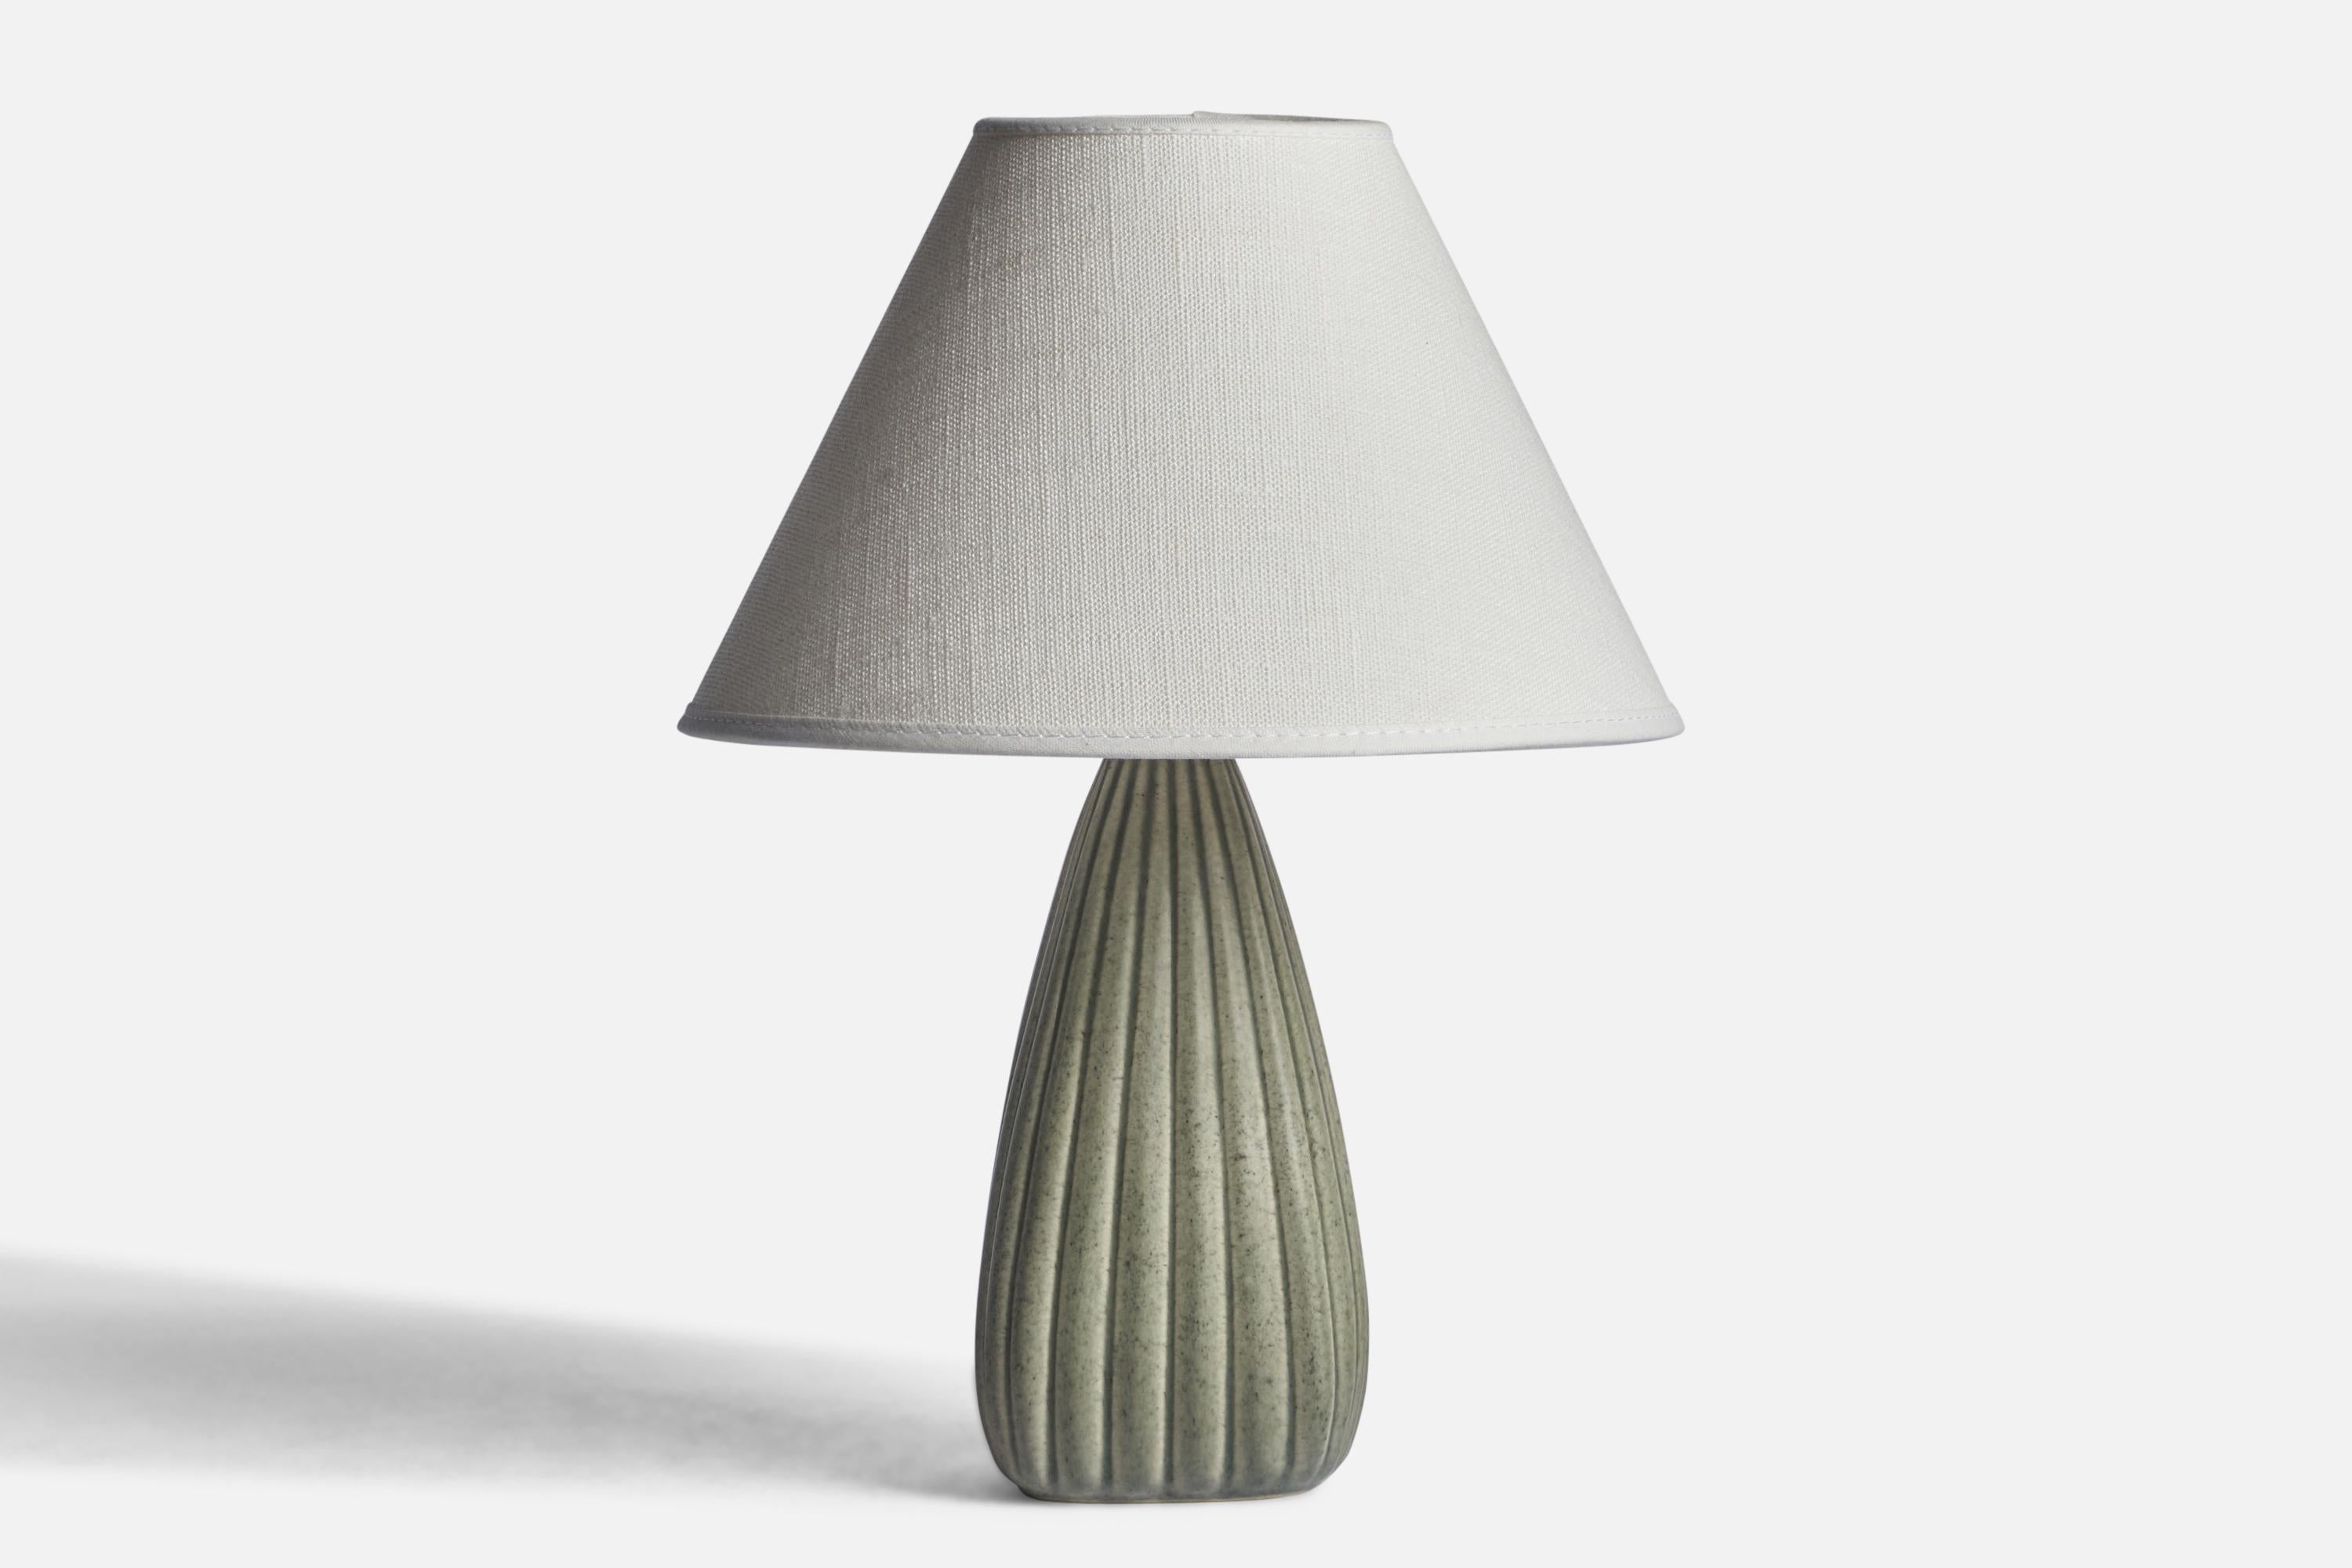 A grey-glazed fluted stoneware table lamp designed and produced in Denmark, c. 1950s.

Dimensions of Lamp (inches): 8” H x 3.2” Diameter
Dimensions of Shade (inches): 3” Top Diameter x 8” Bottom Diameter x 5” H 
Dimensions of Lamp with Shade